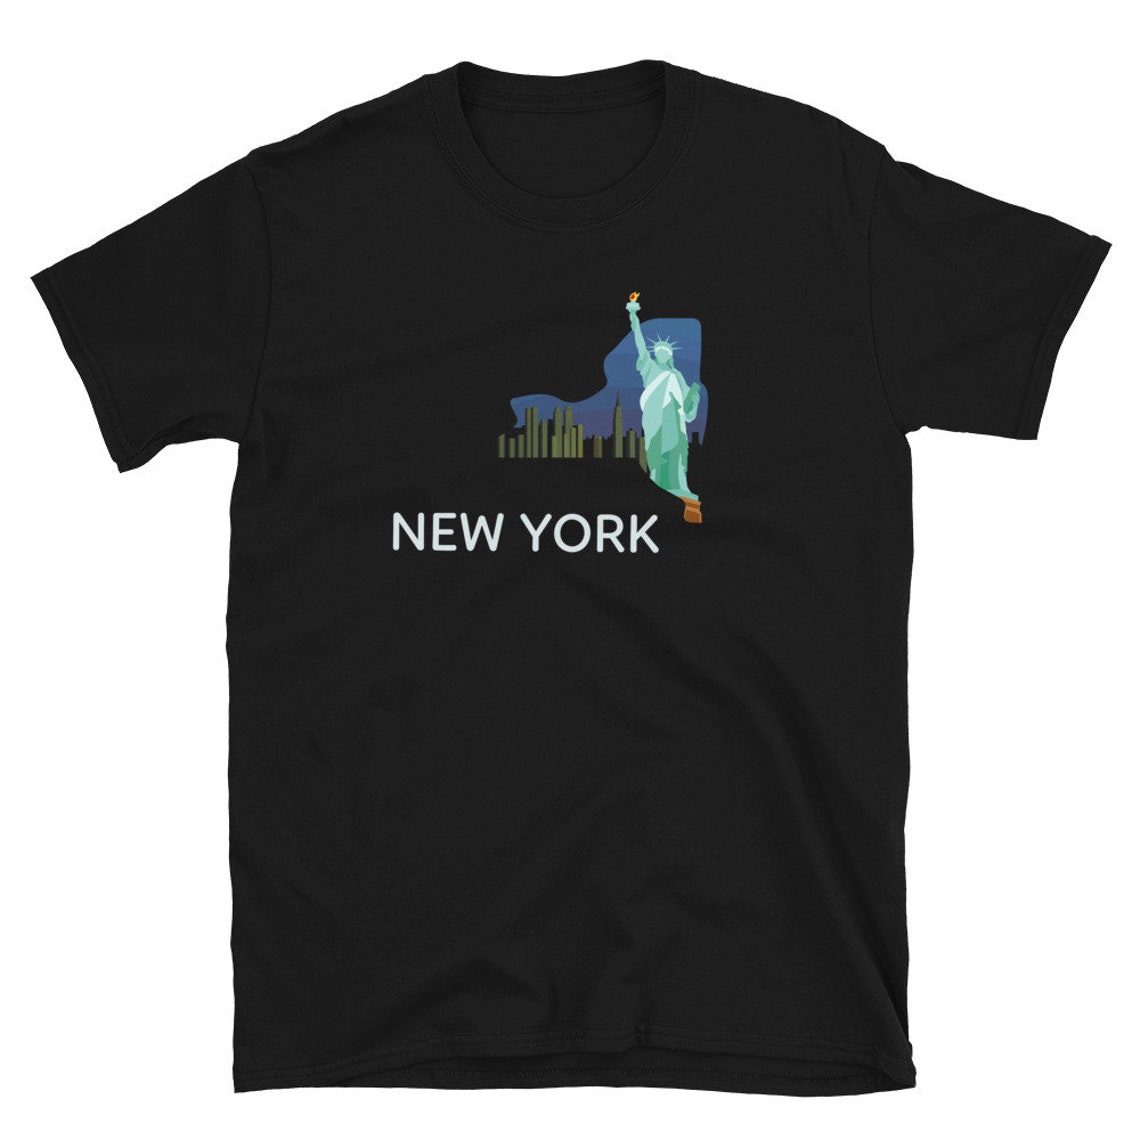 State of New York T-shirt Manhattan Central Park Times | Etsy